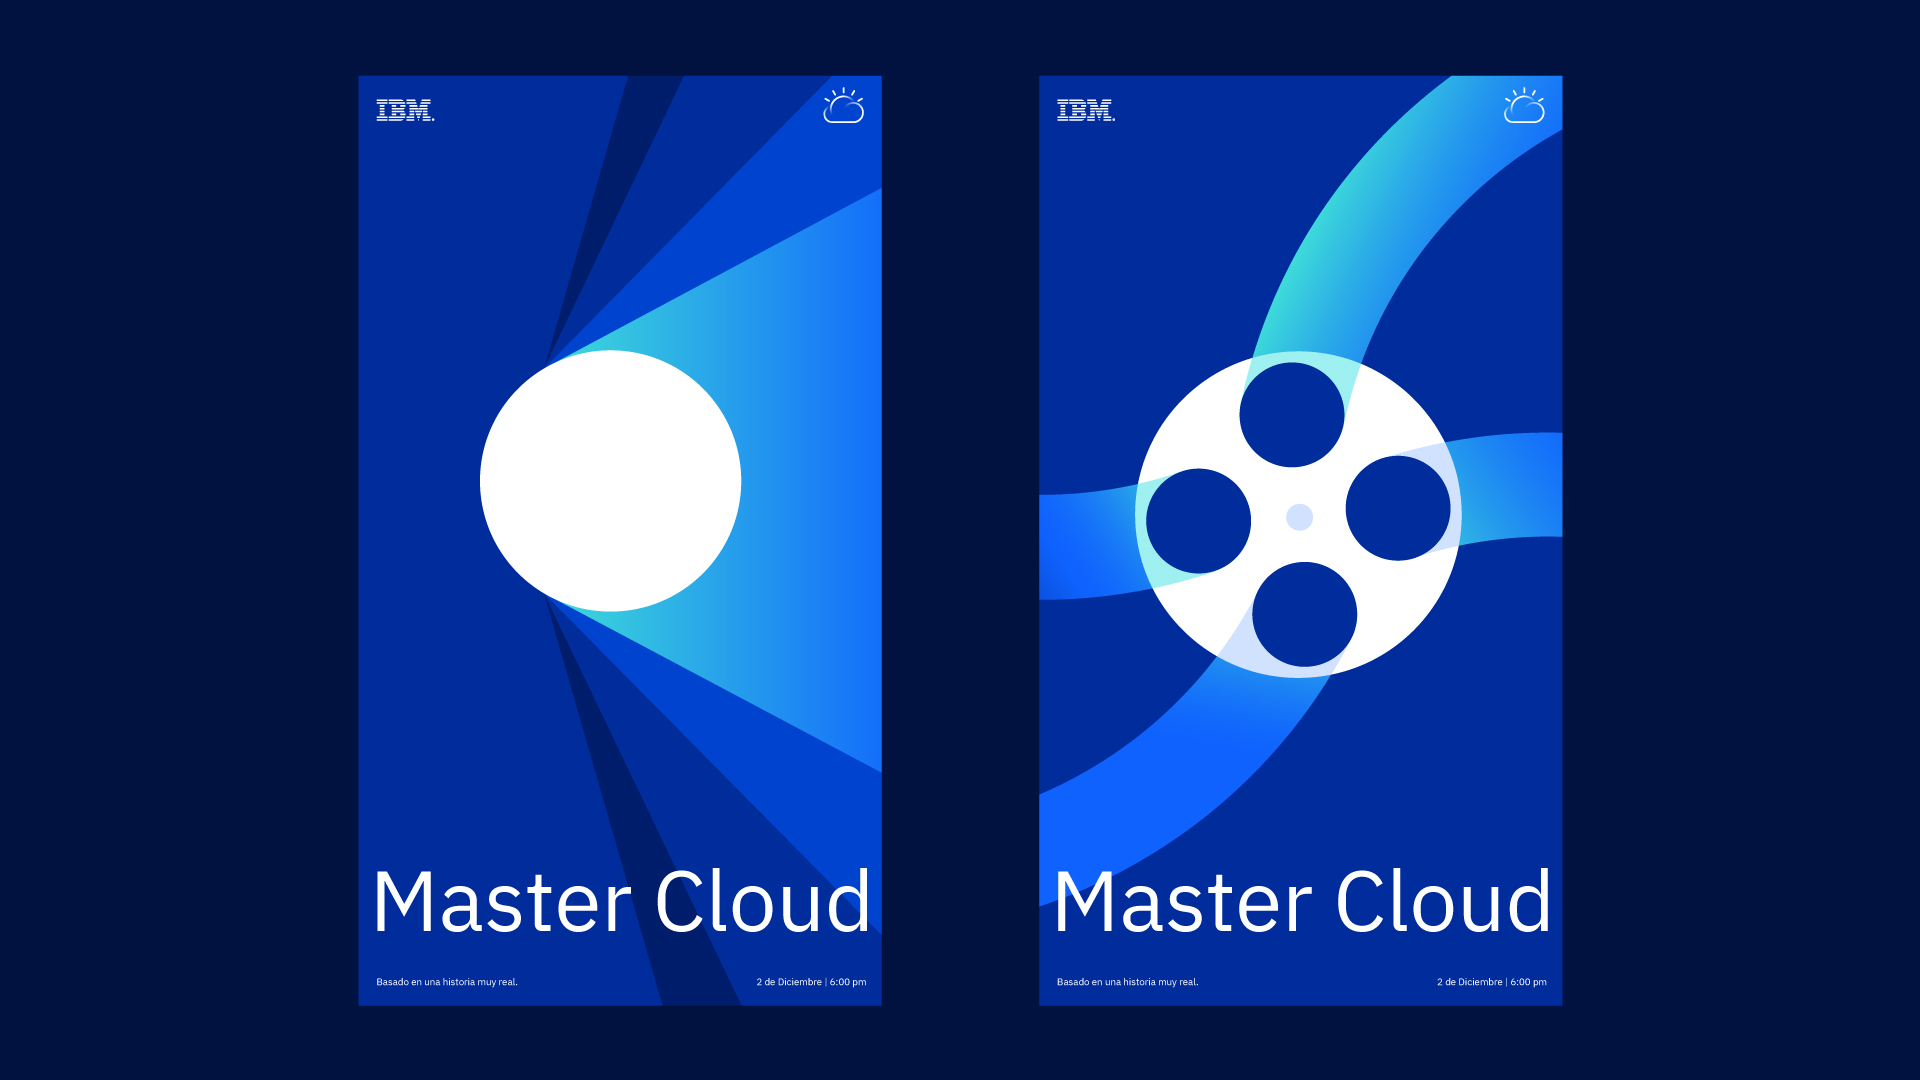 Mastercloud_posters_concept